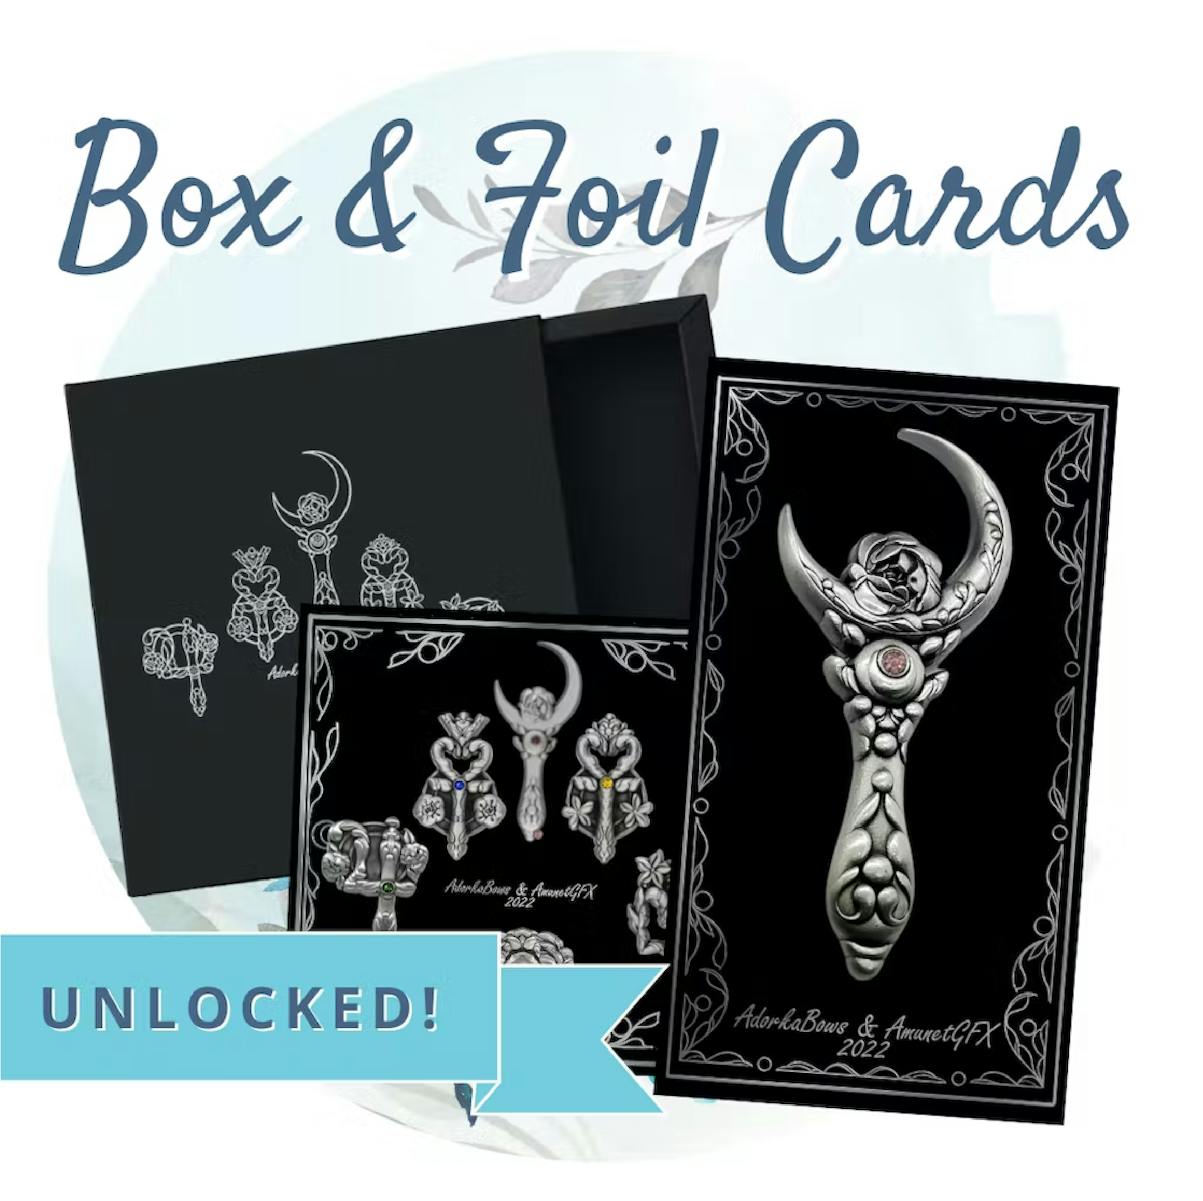 Display Cards and Boxes for Sets!